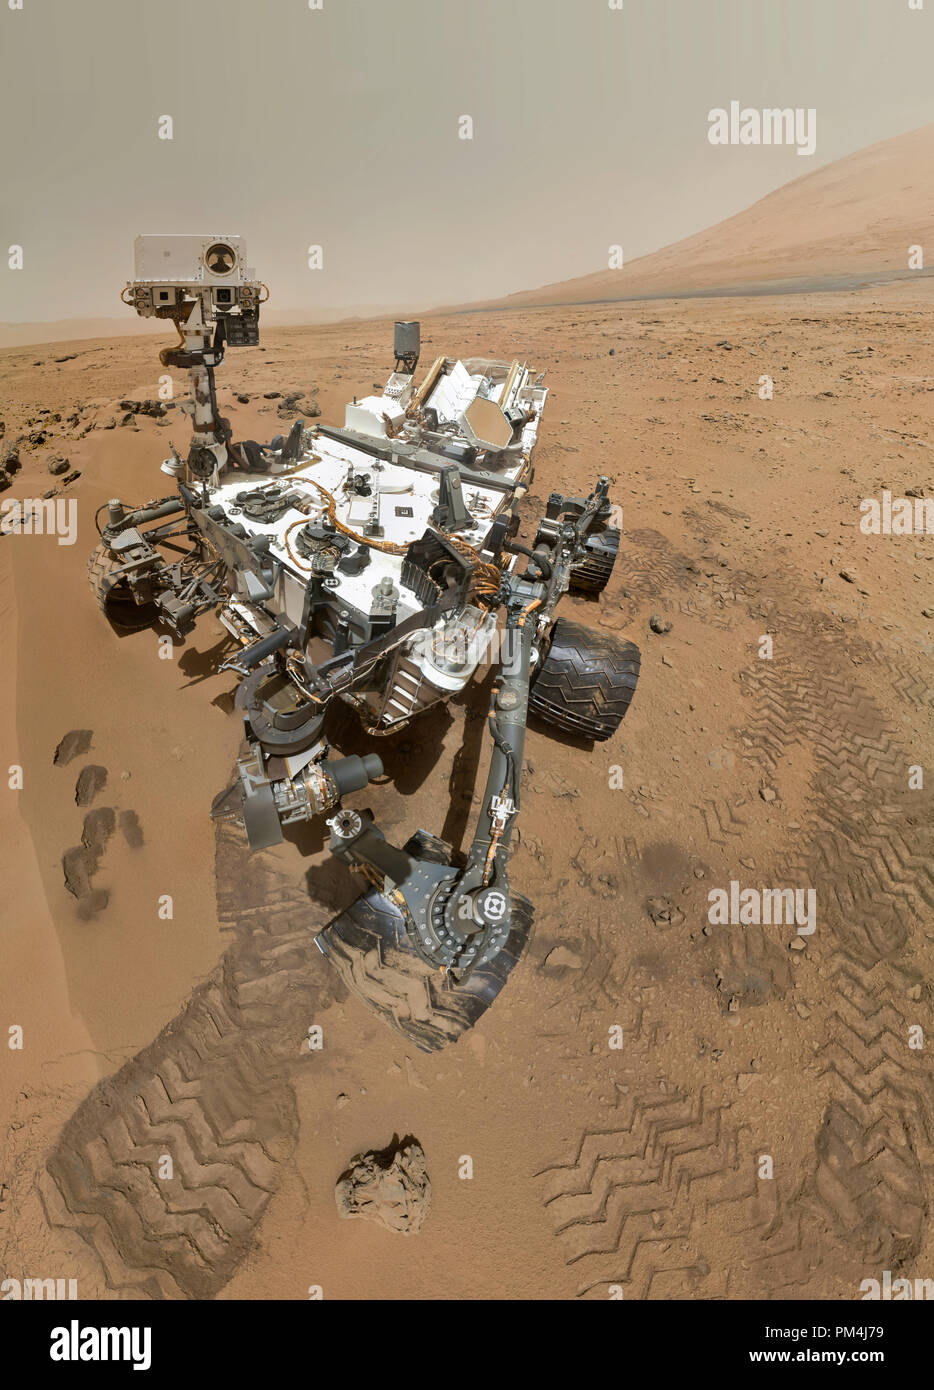 On Sol 84 (Oct. 31, 2012), NASA's Curiosity rover used the Mars Hand Lens Imager (MAHLI) to capture this set of 55 high-resolution images, which were stitched together to create this full-color self-portrait. The mosaic shows the rover at 'Rocknest,' the spot in Gale Crater where the mission's first scoop sampling took place. Four scoop scars can be seen in the regolith in front of the rover. The base of Gale Crater's 3-mile-high (5-kilometer) sedimentary mountain, Mount Sharp, rises on the right side of the frame. Mountains in the background to the left are the northern wall of Gale Crater. Stock Photo